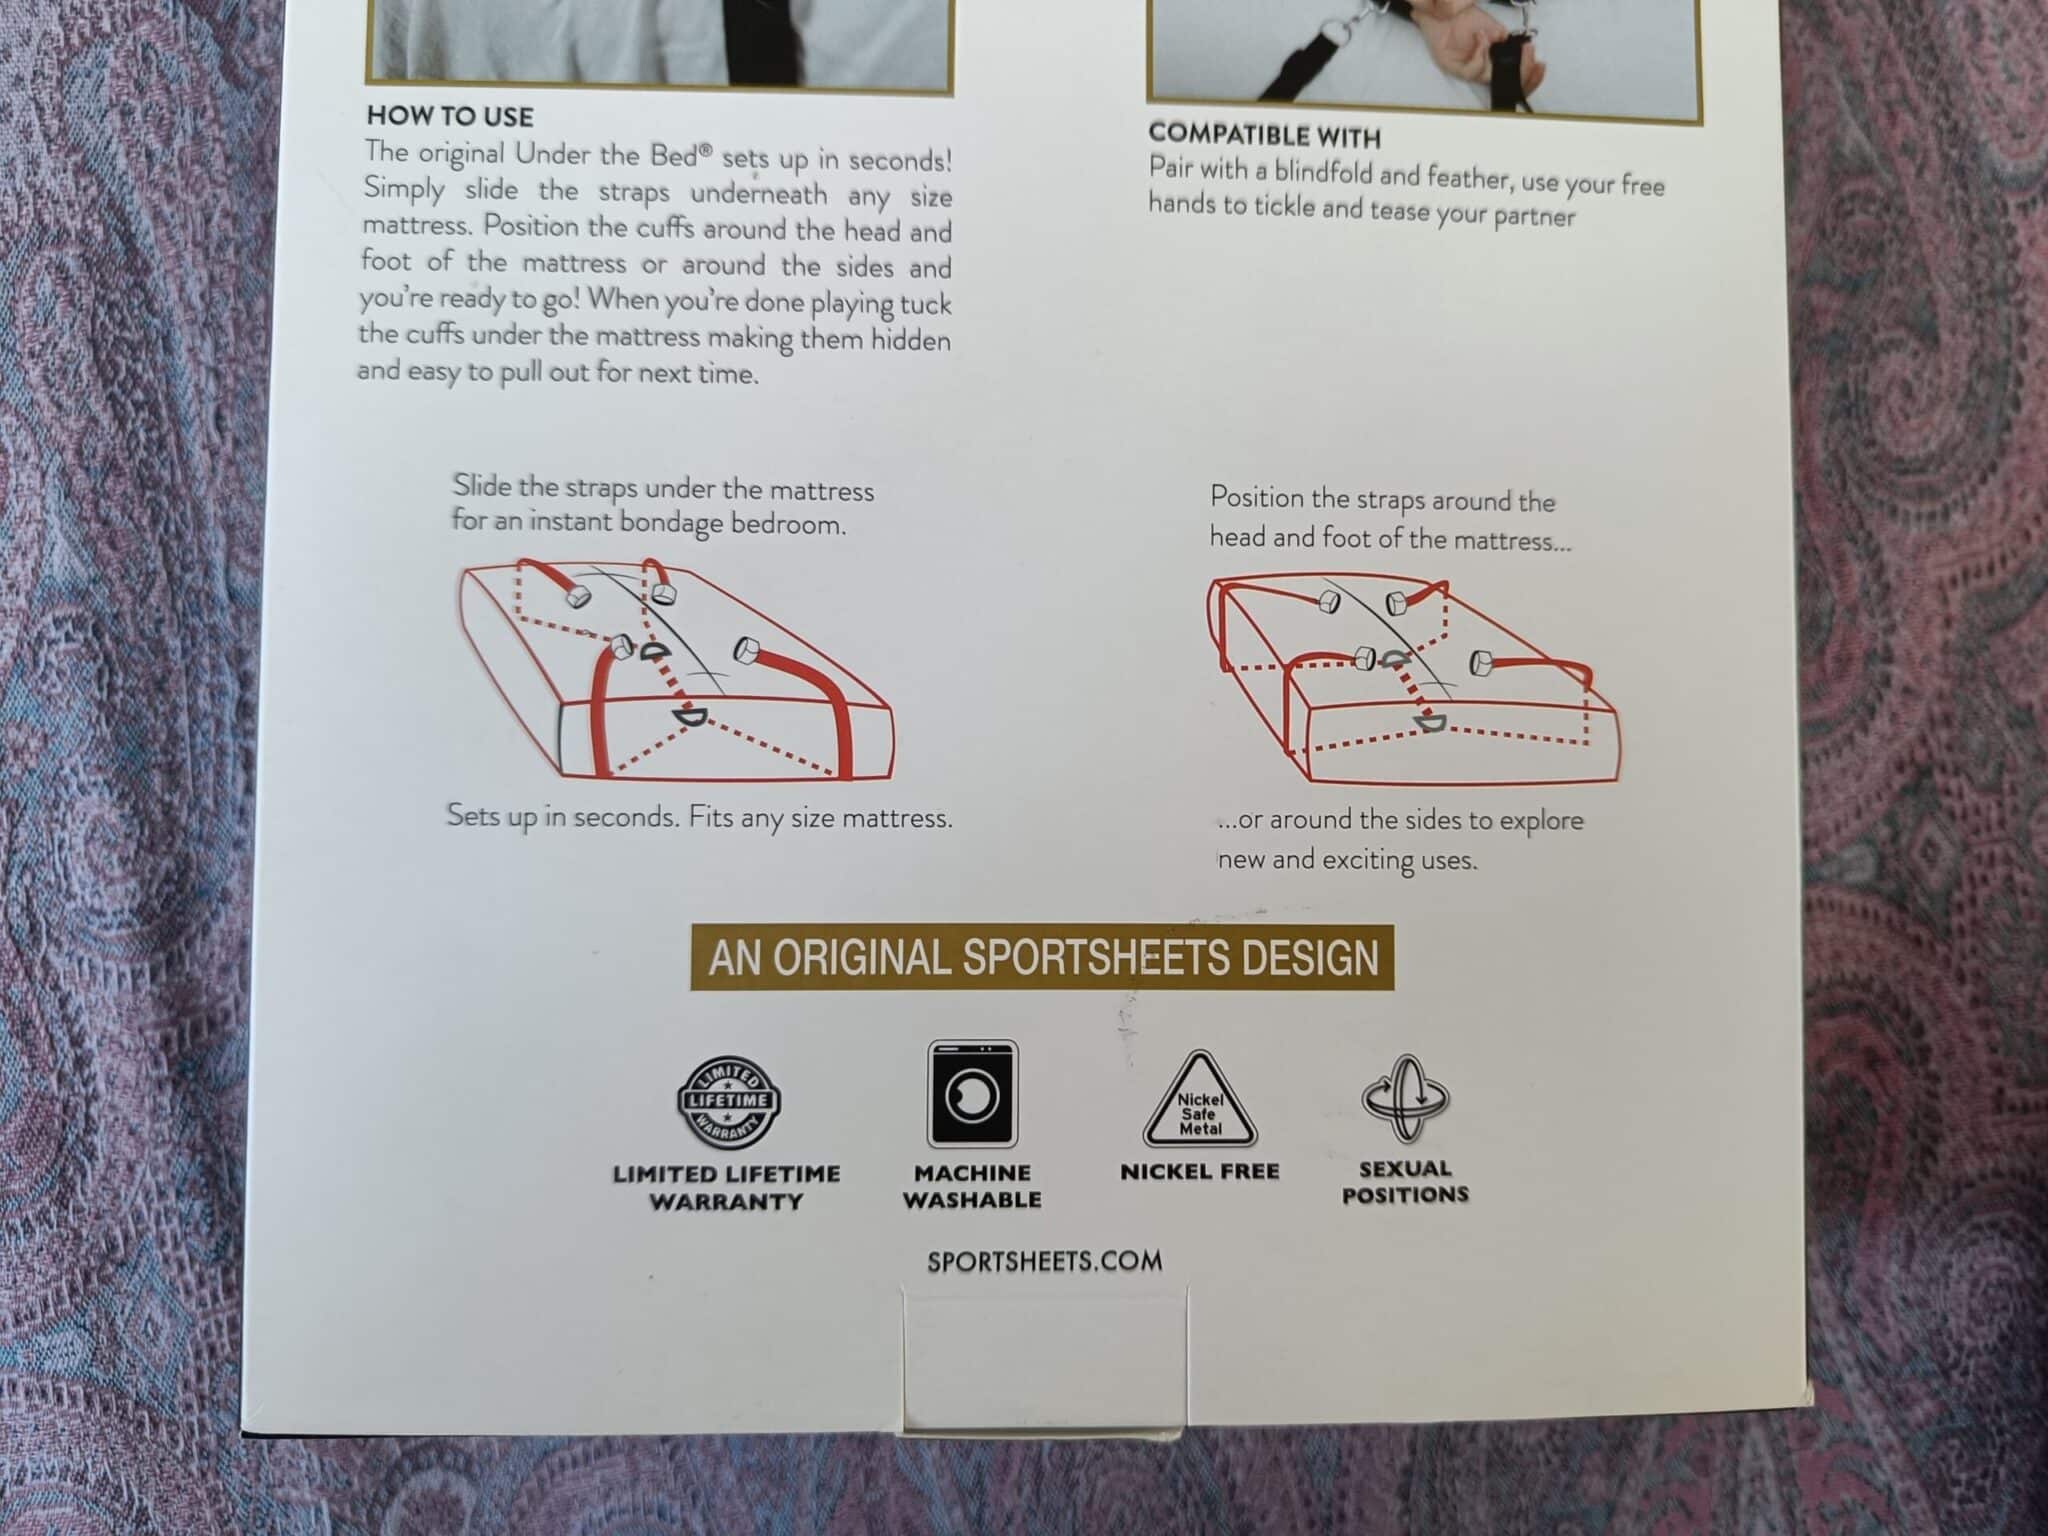 Sportsheets Under the Bed Restraint System Packaging